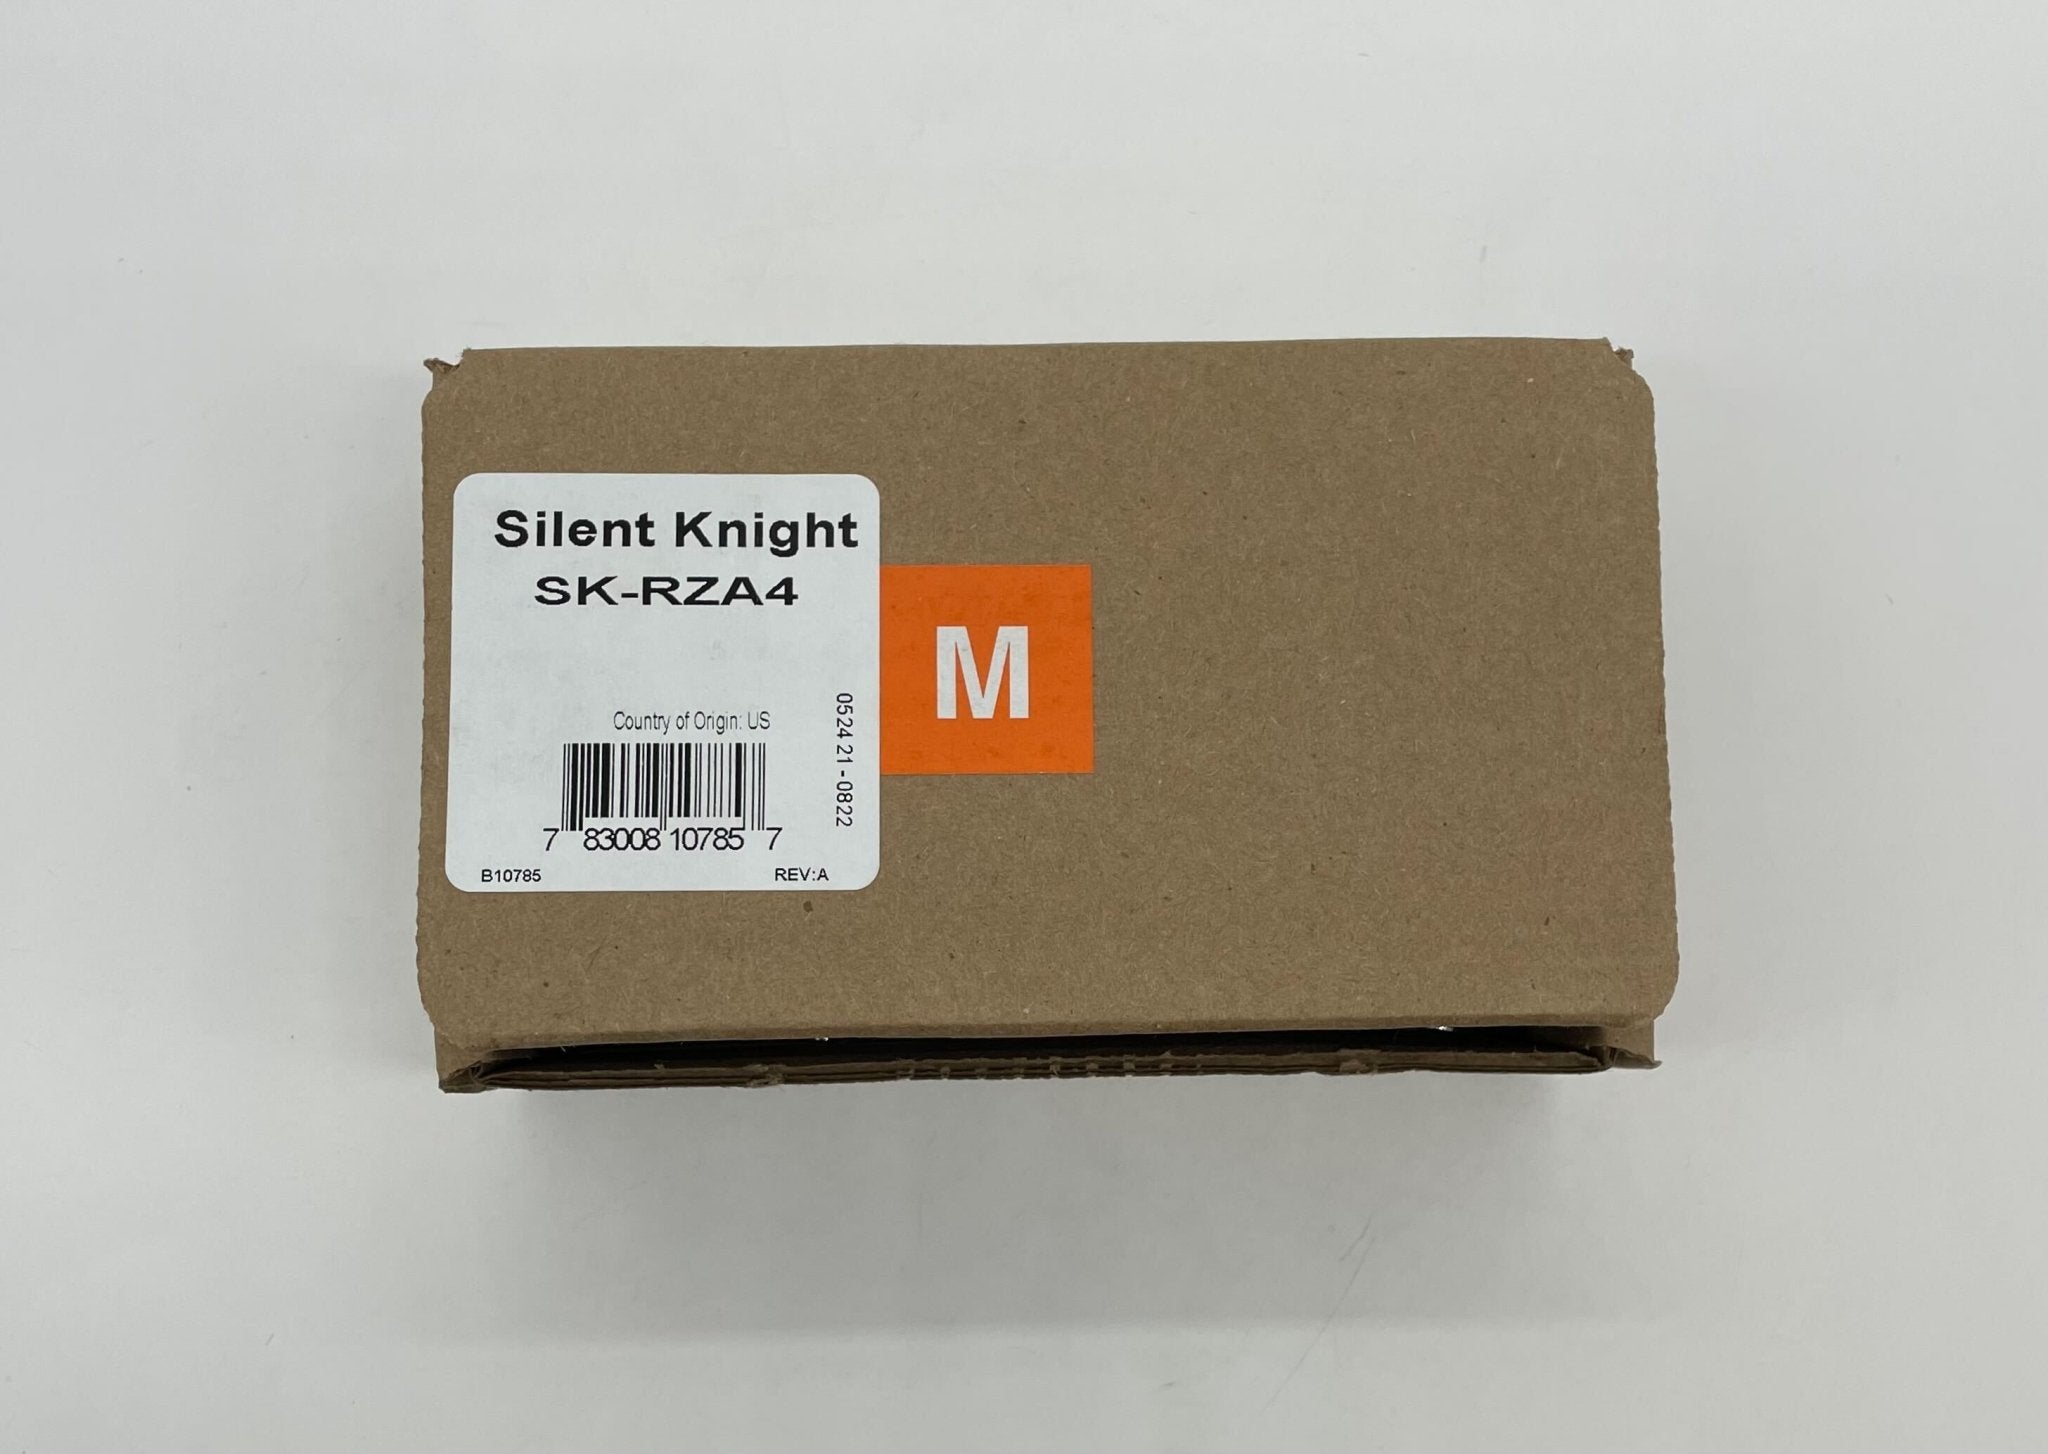 Silent Knight SK-RZA4 - The Fire Alarm Supplier